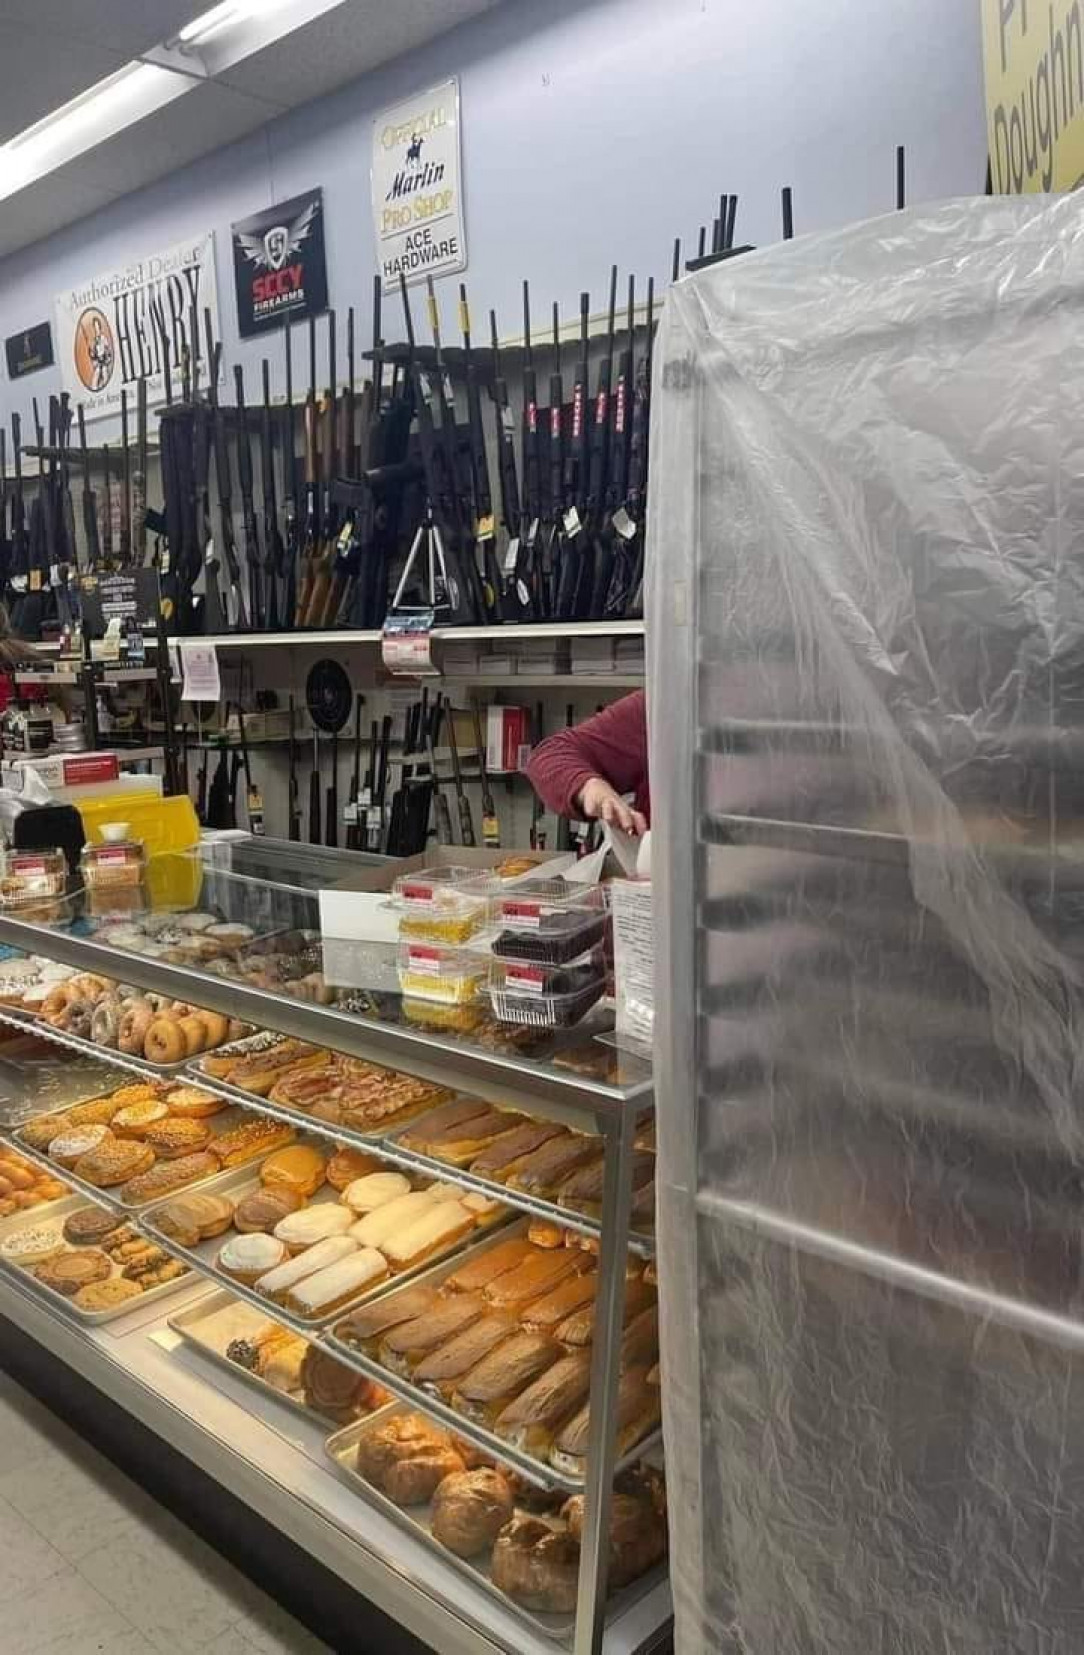 I&#039;ll have a chocolate eclair and Glock 9, please